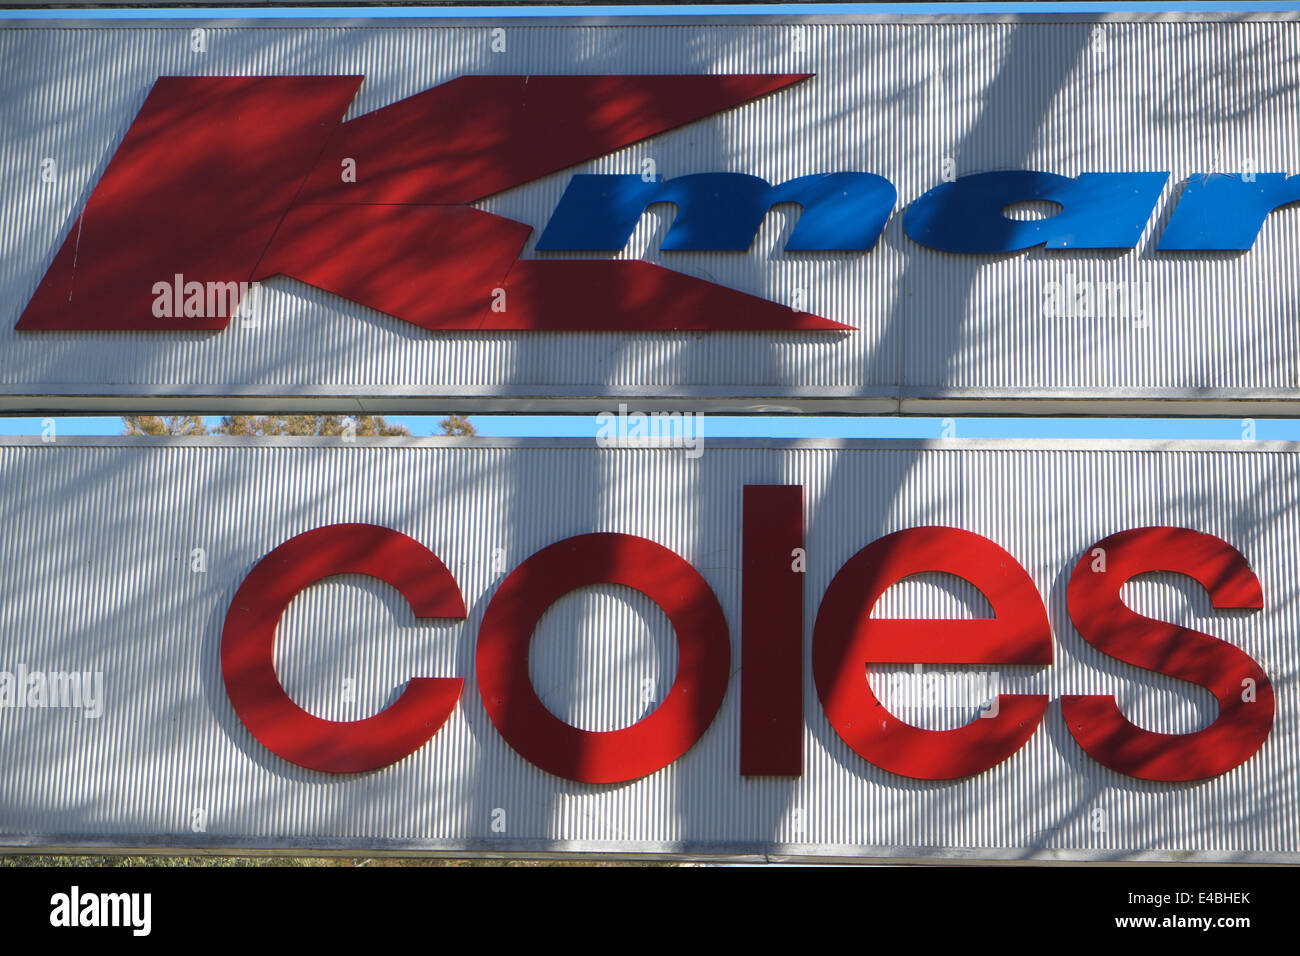 australian retailers kmart and coles supermarkets at Warriewood,sydney Stock Photo